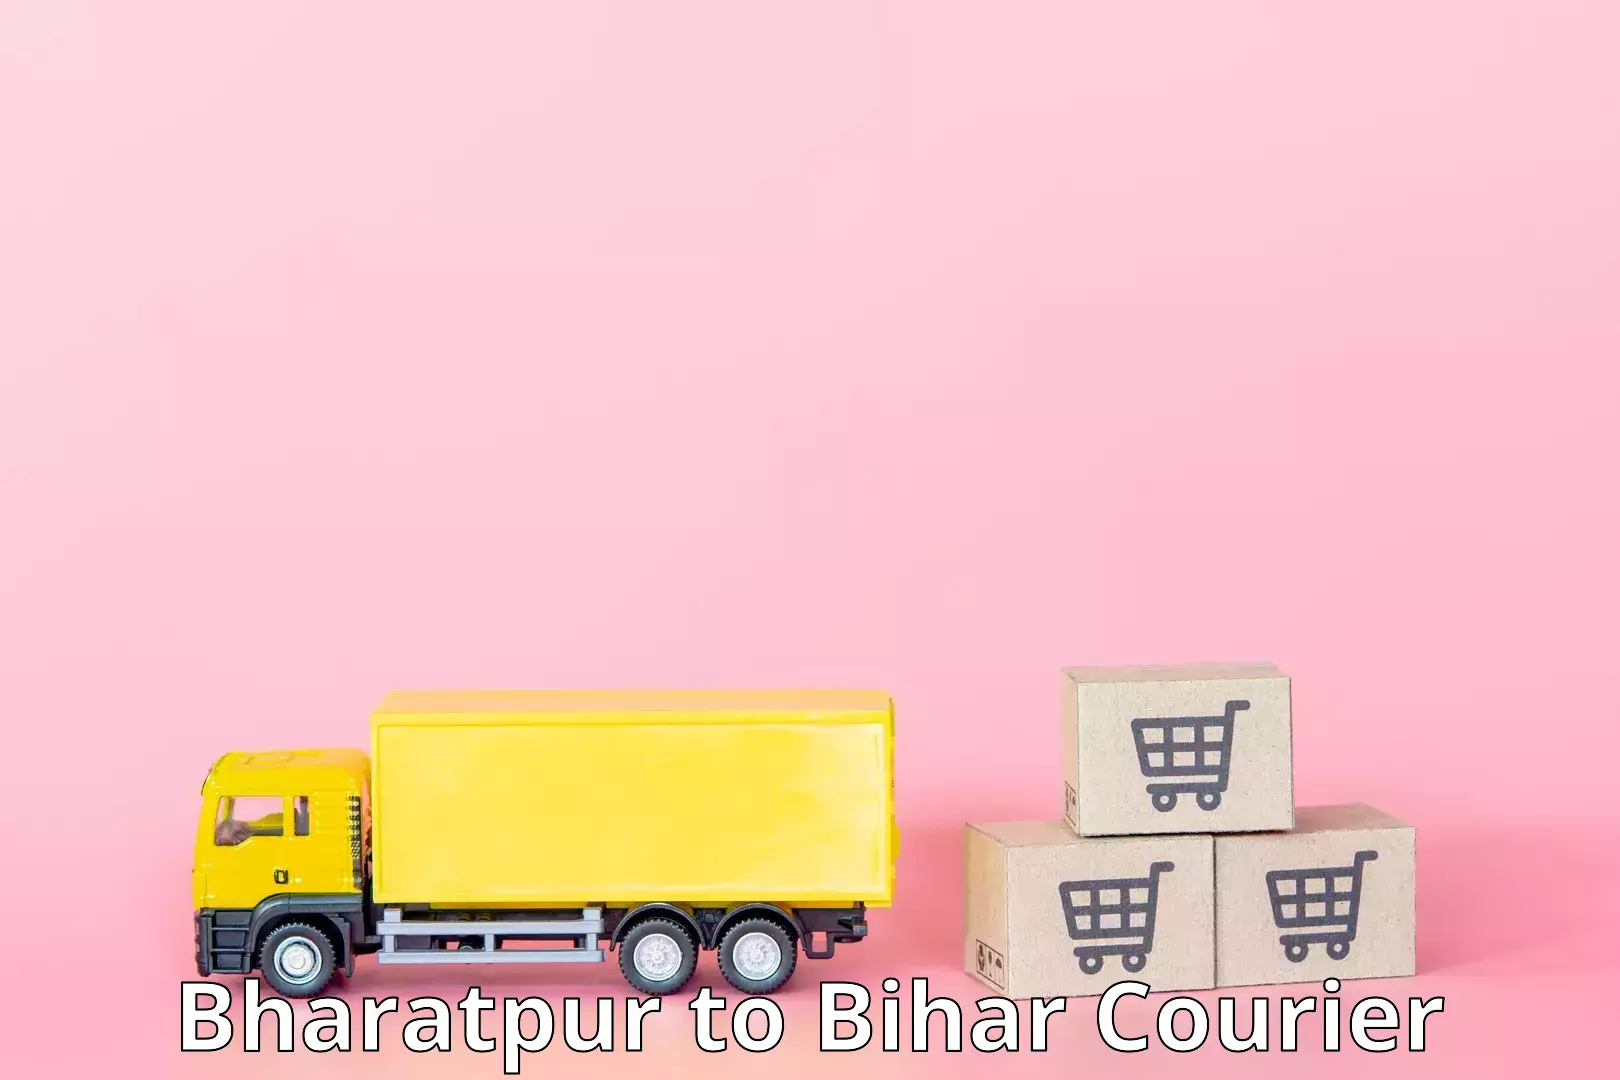 Reliable shipping partners Bharatpur to Marhowrah